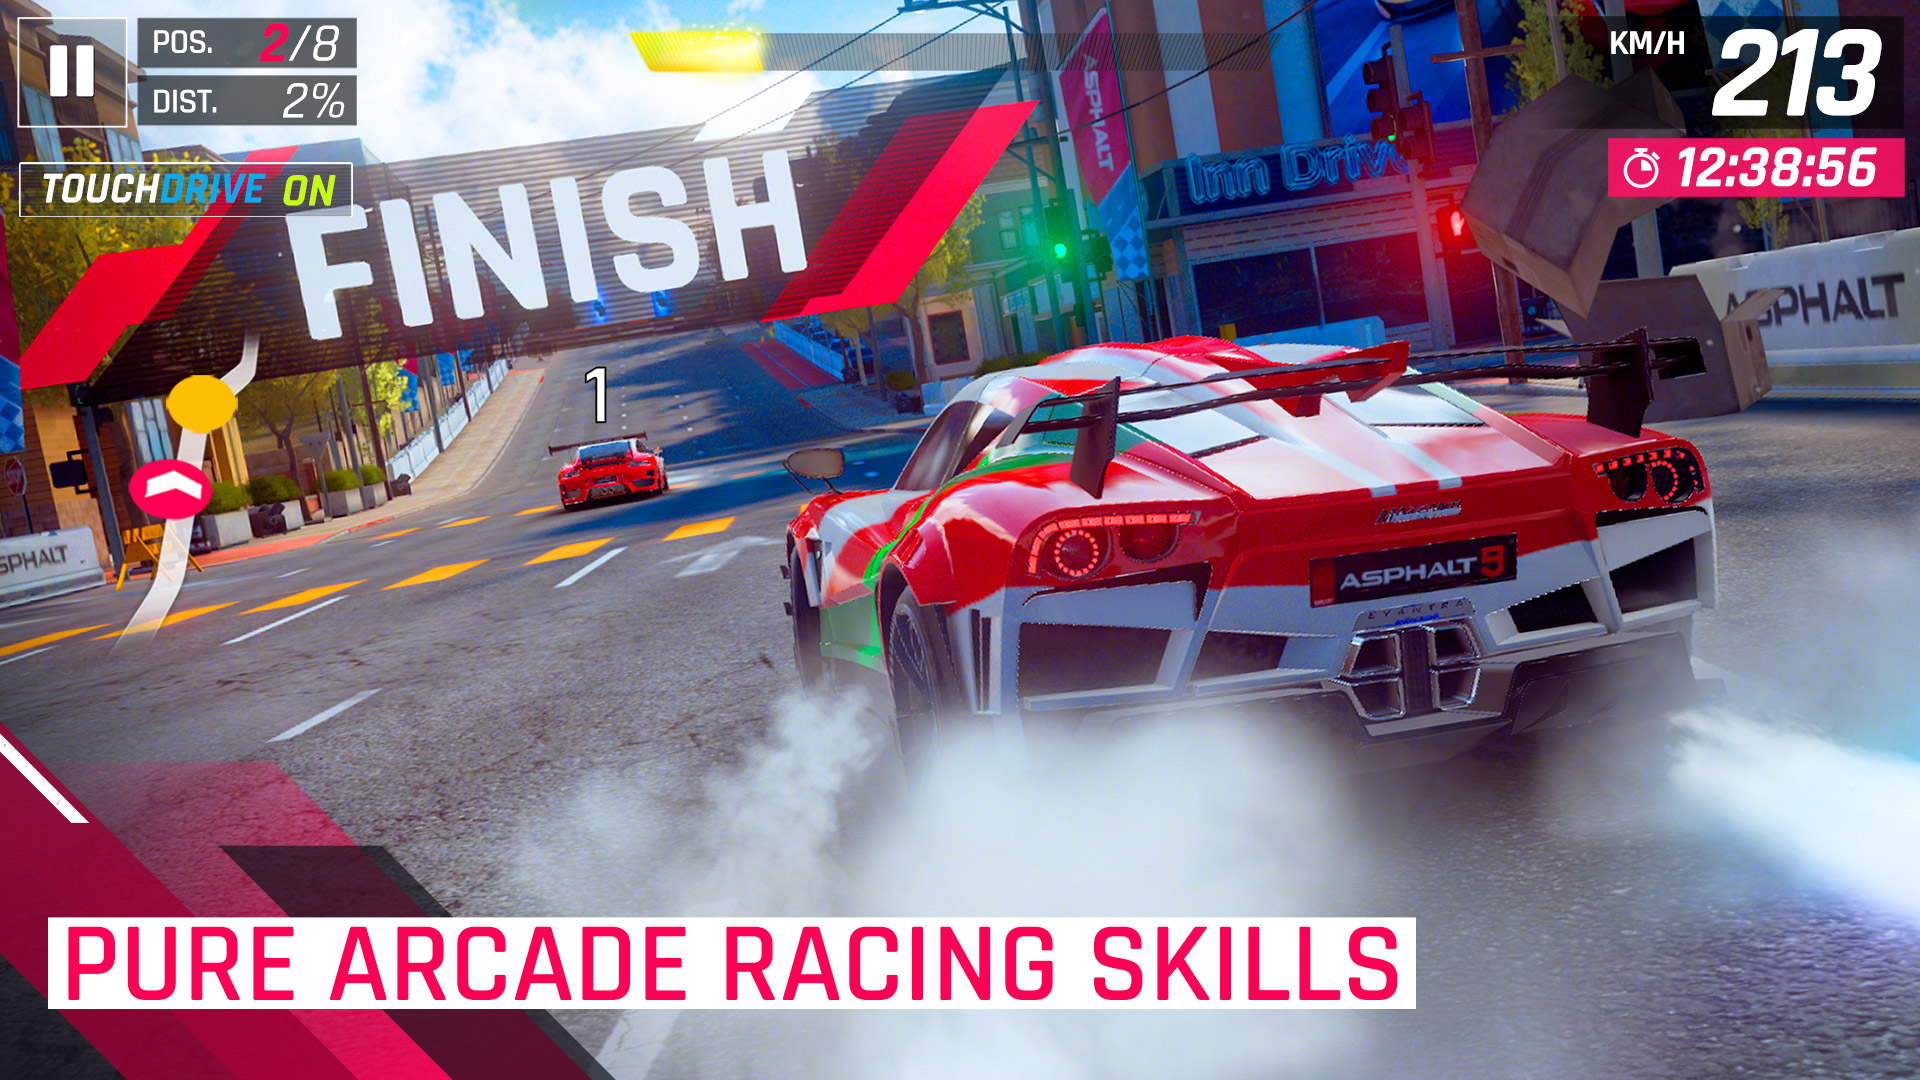 Asphalt 9: Legends On Your Windows / Mac PC – Download And Install